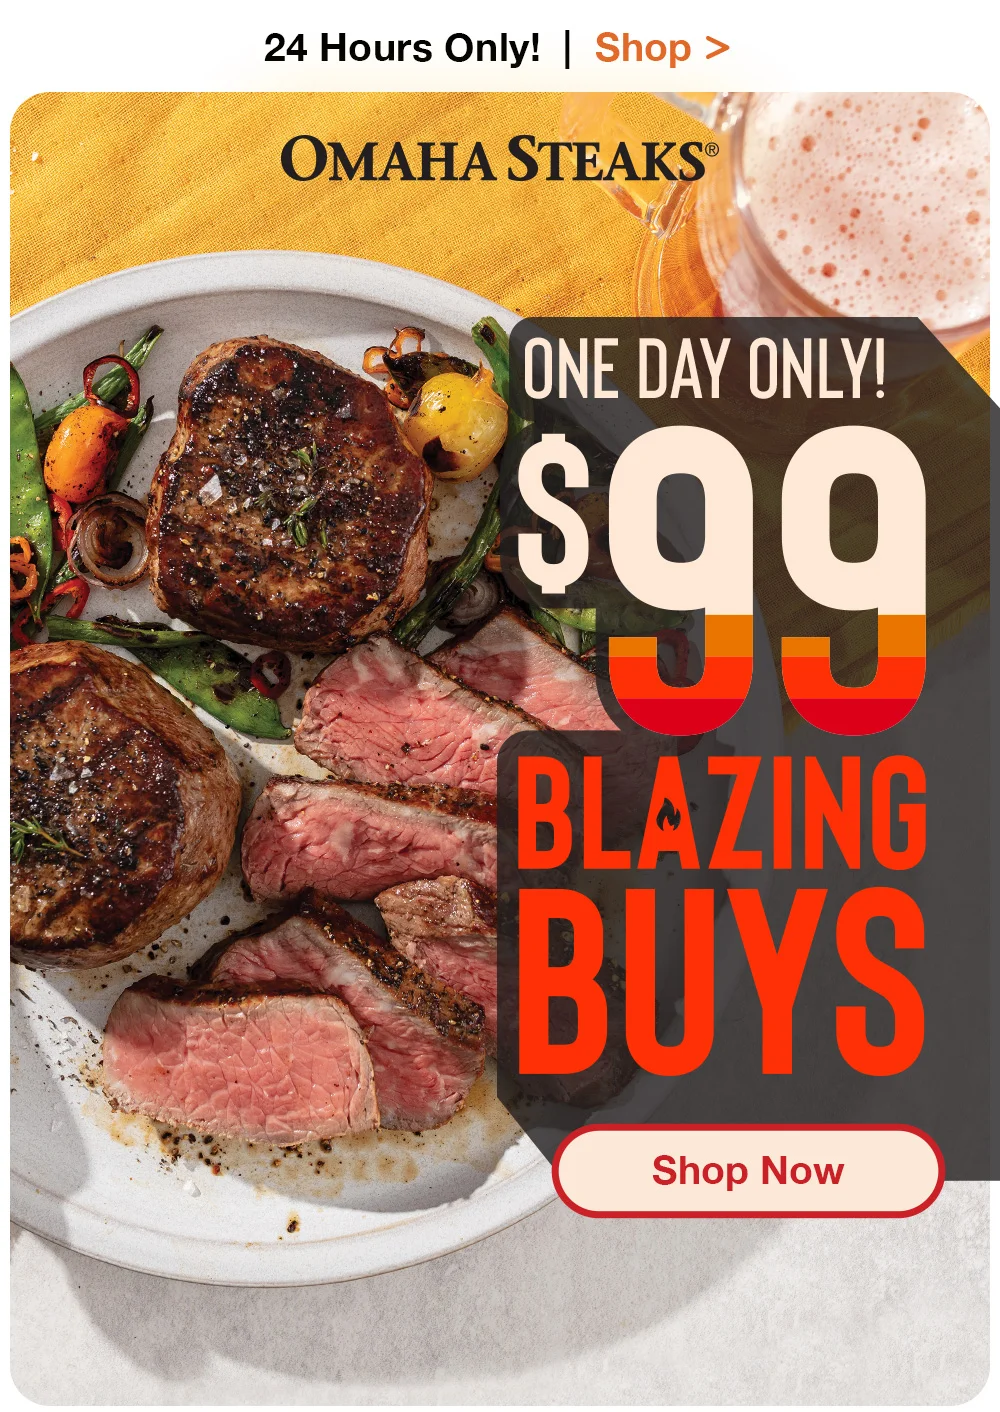 24 Hours Only! | Shop > OMAHA STEAKS® | ONE-DAY ONLY! \\$99 BLAZING BUYS || Shop Now